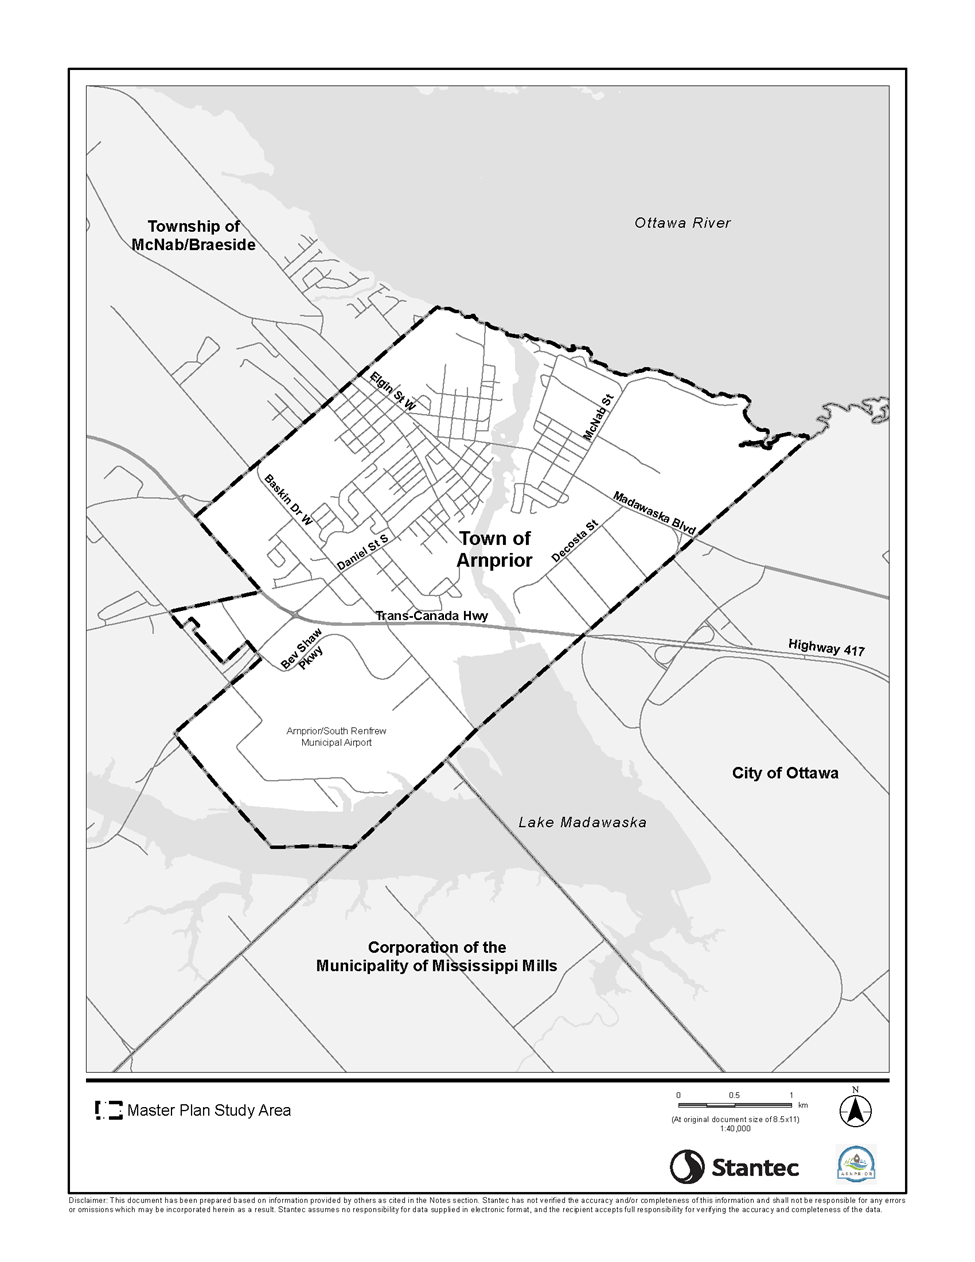 Figure 1: Key Map of the Town of Arnprior